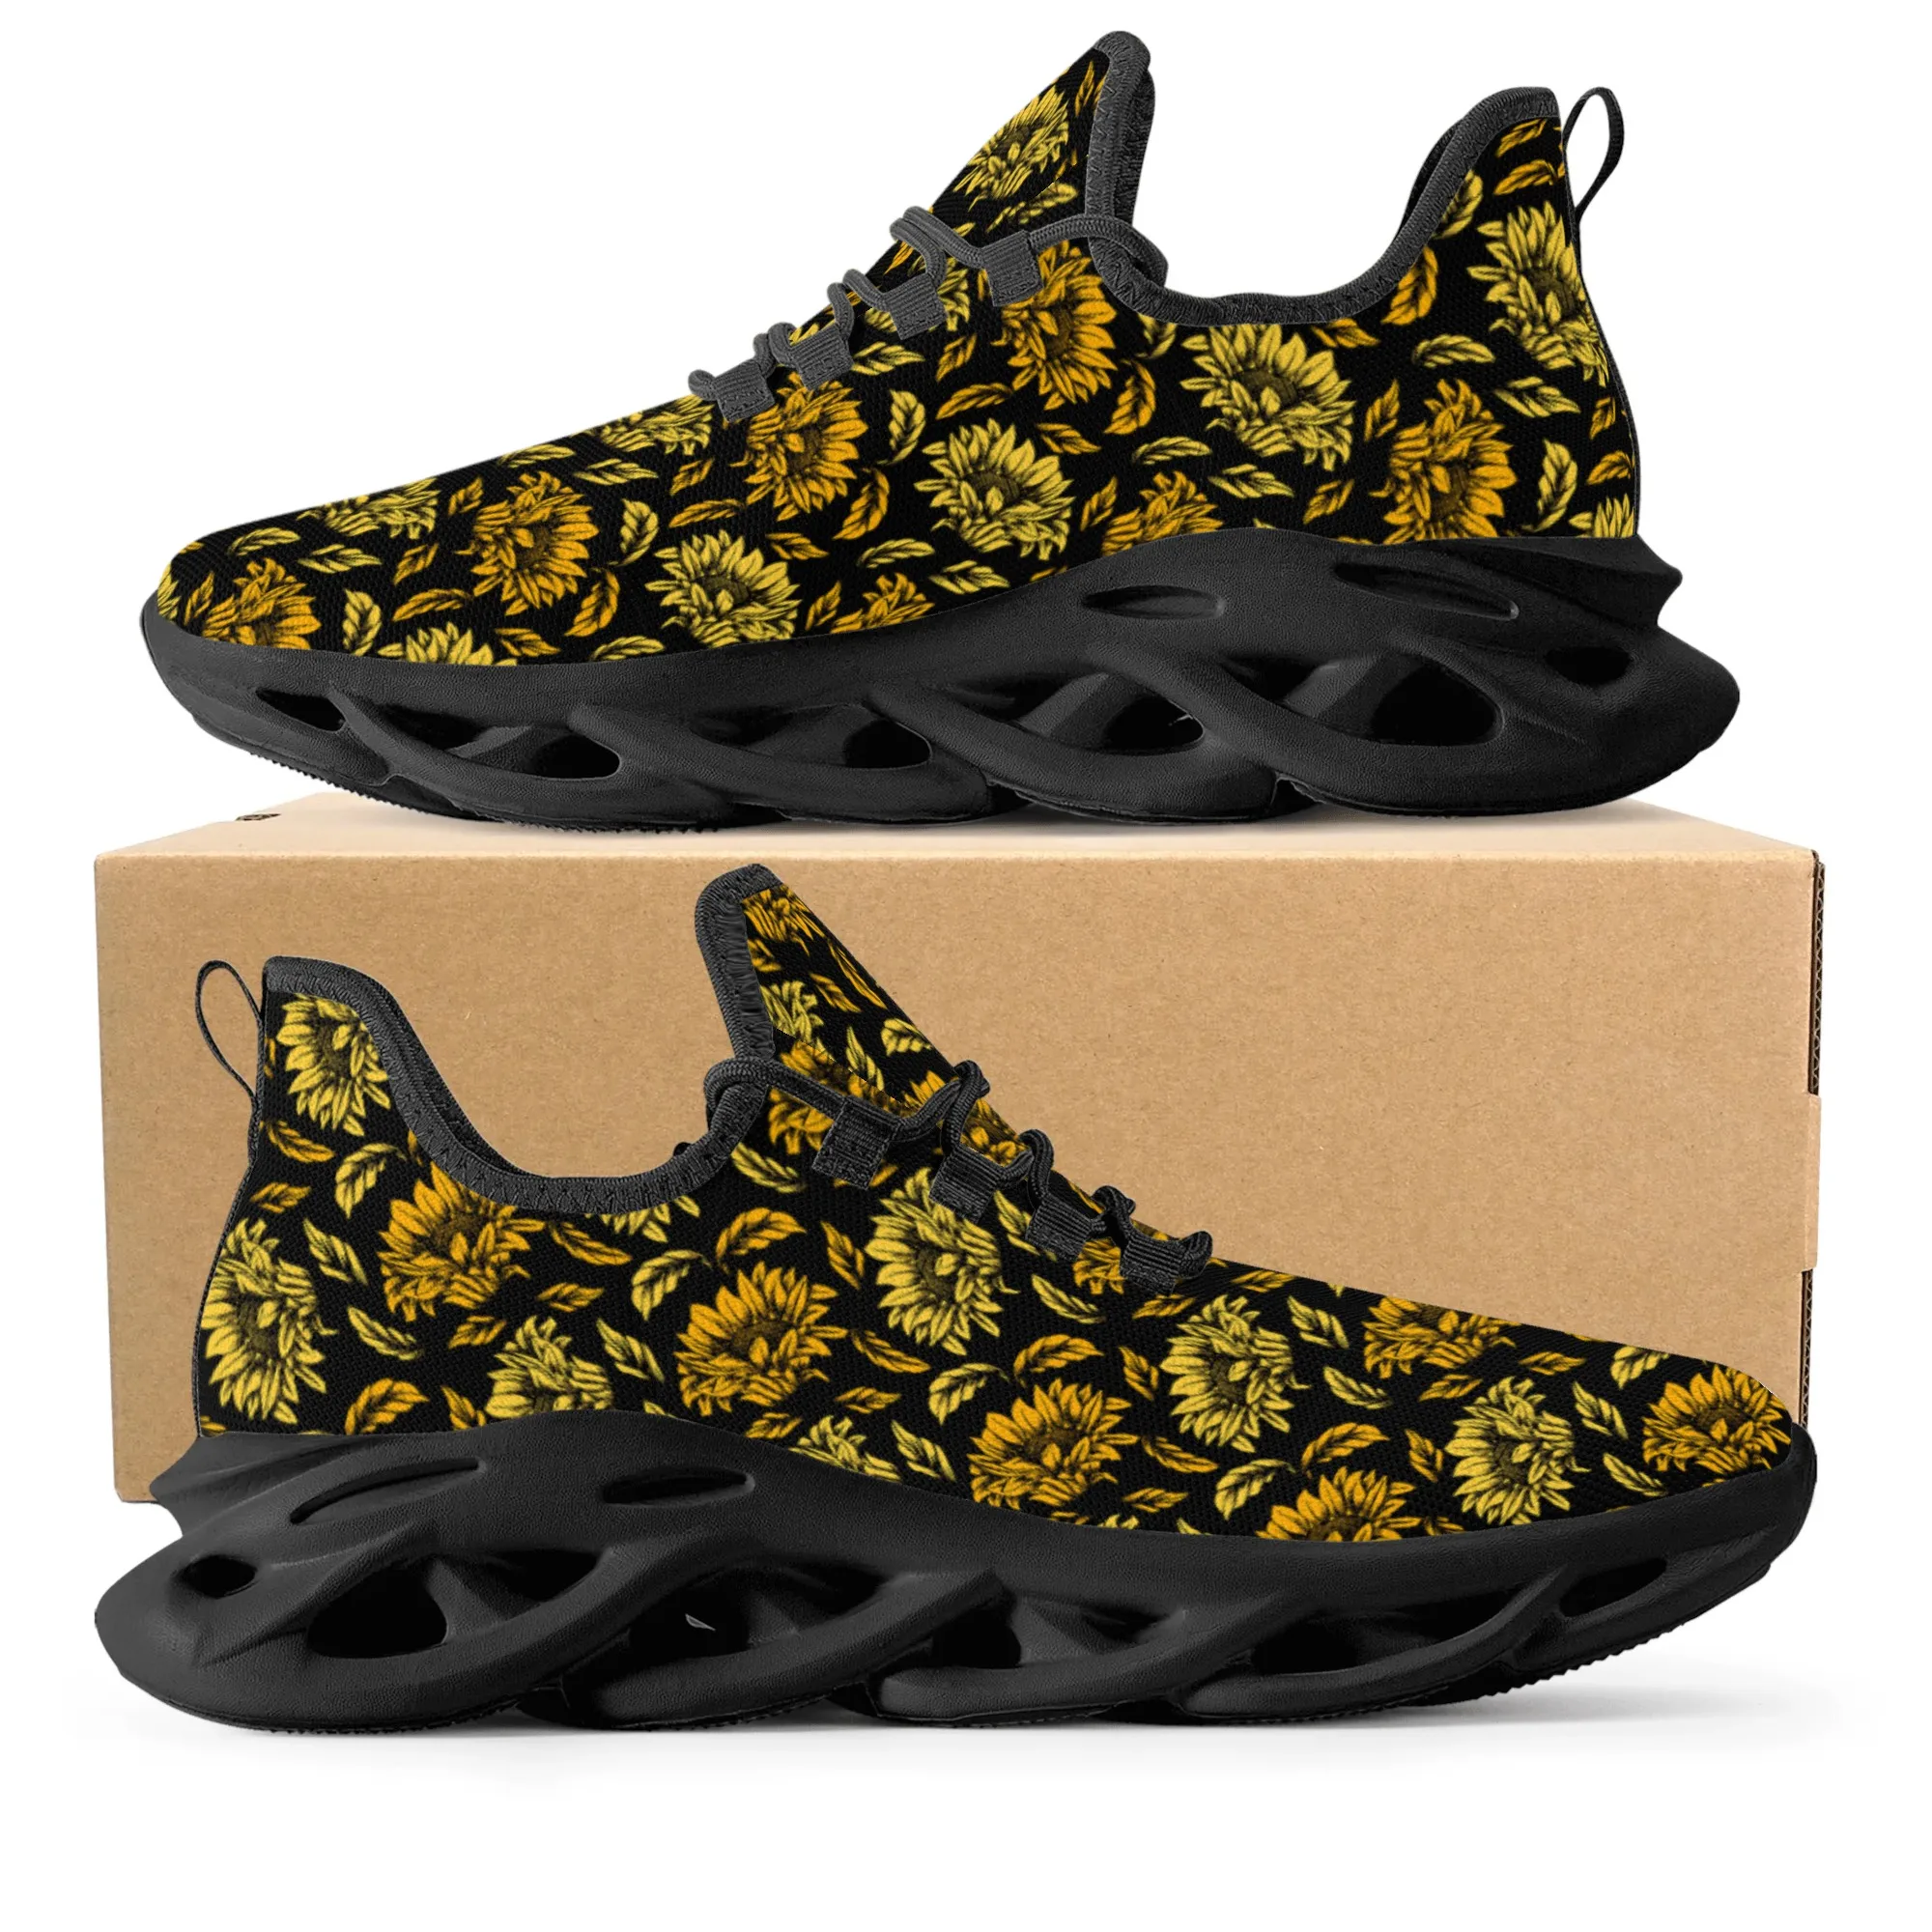 Sunflowers Print Design Fashion Funny Sneakers Men Women Teenager Breathable Mesh Casual Running Shoes Lace-Up Basketball Shoe air mesh women sneaker sock shoes summer breathable cross tie platform round toe casual fashion sport lace up 2020 female girl